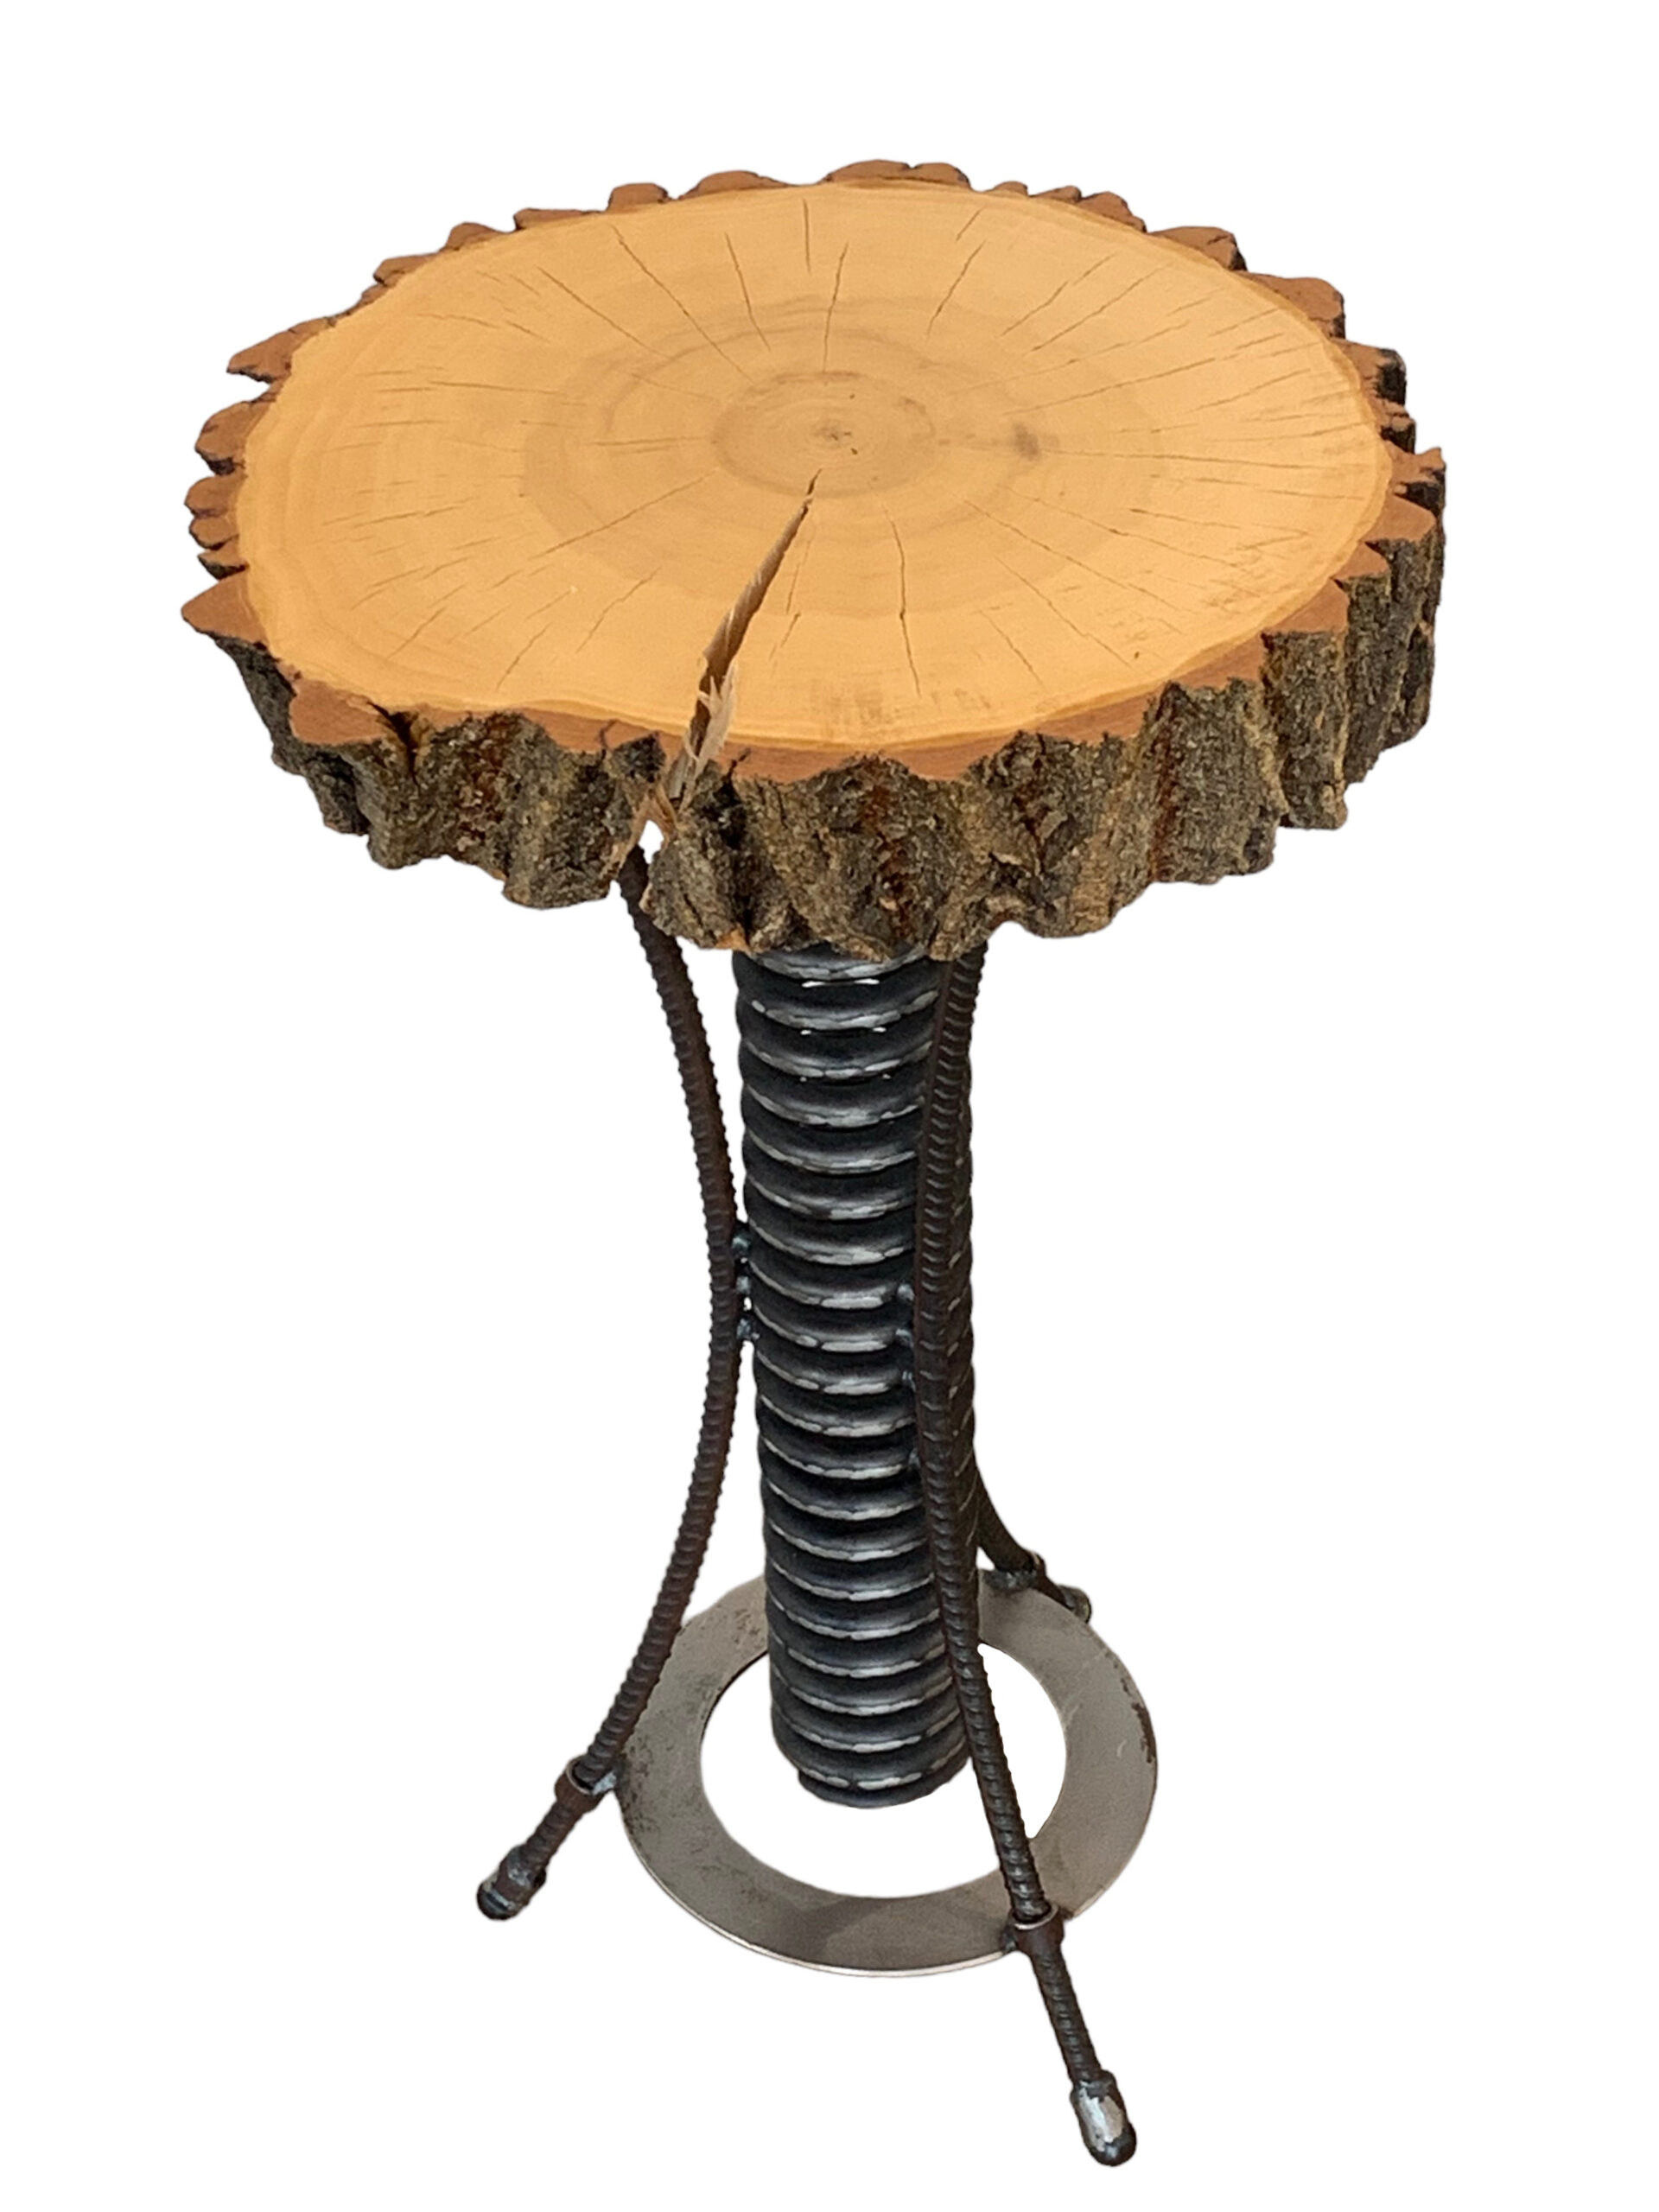 Side Table 3, reclaimed steel and wood by Wendy Stone | Effusion Art Gallery + Cast Glass Studio, Invermere BC